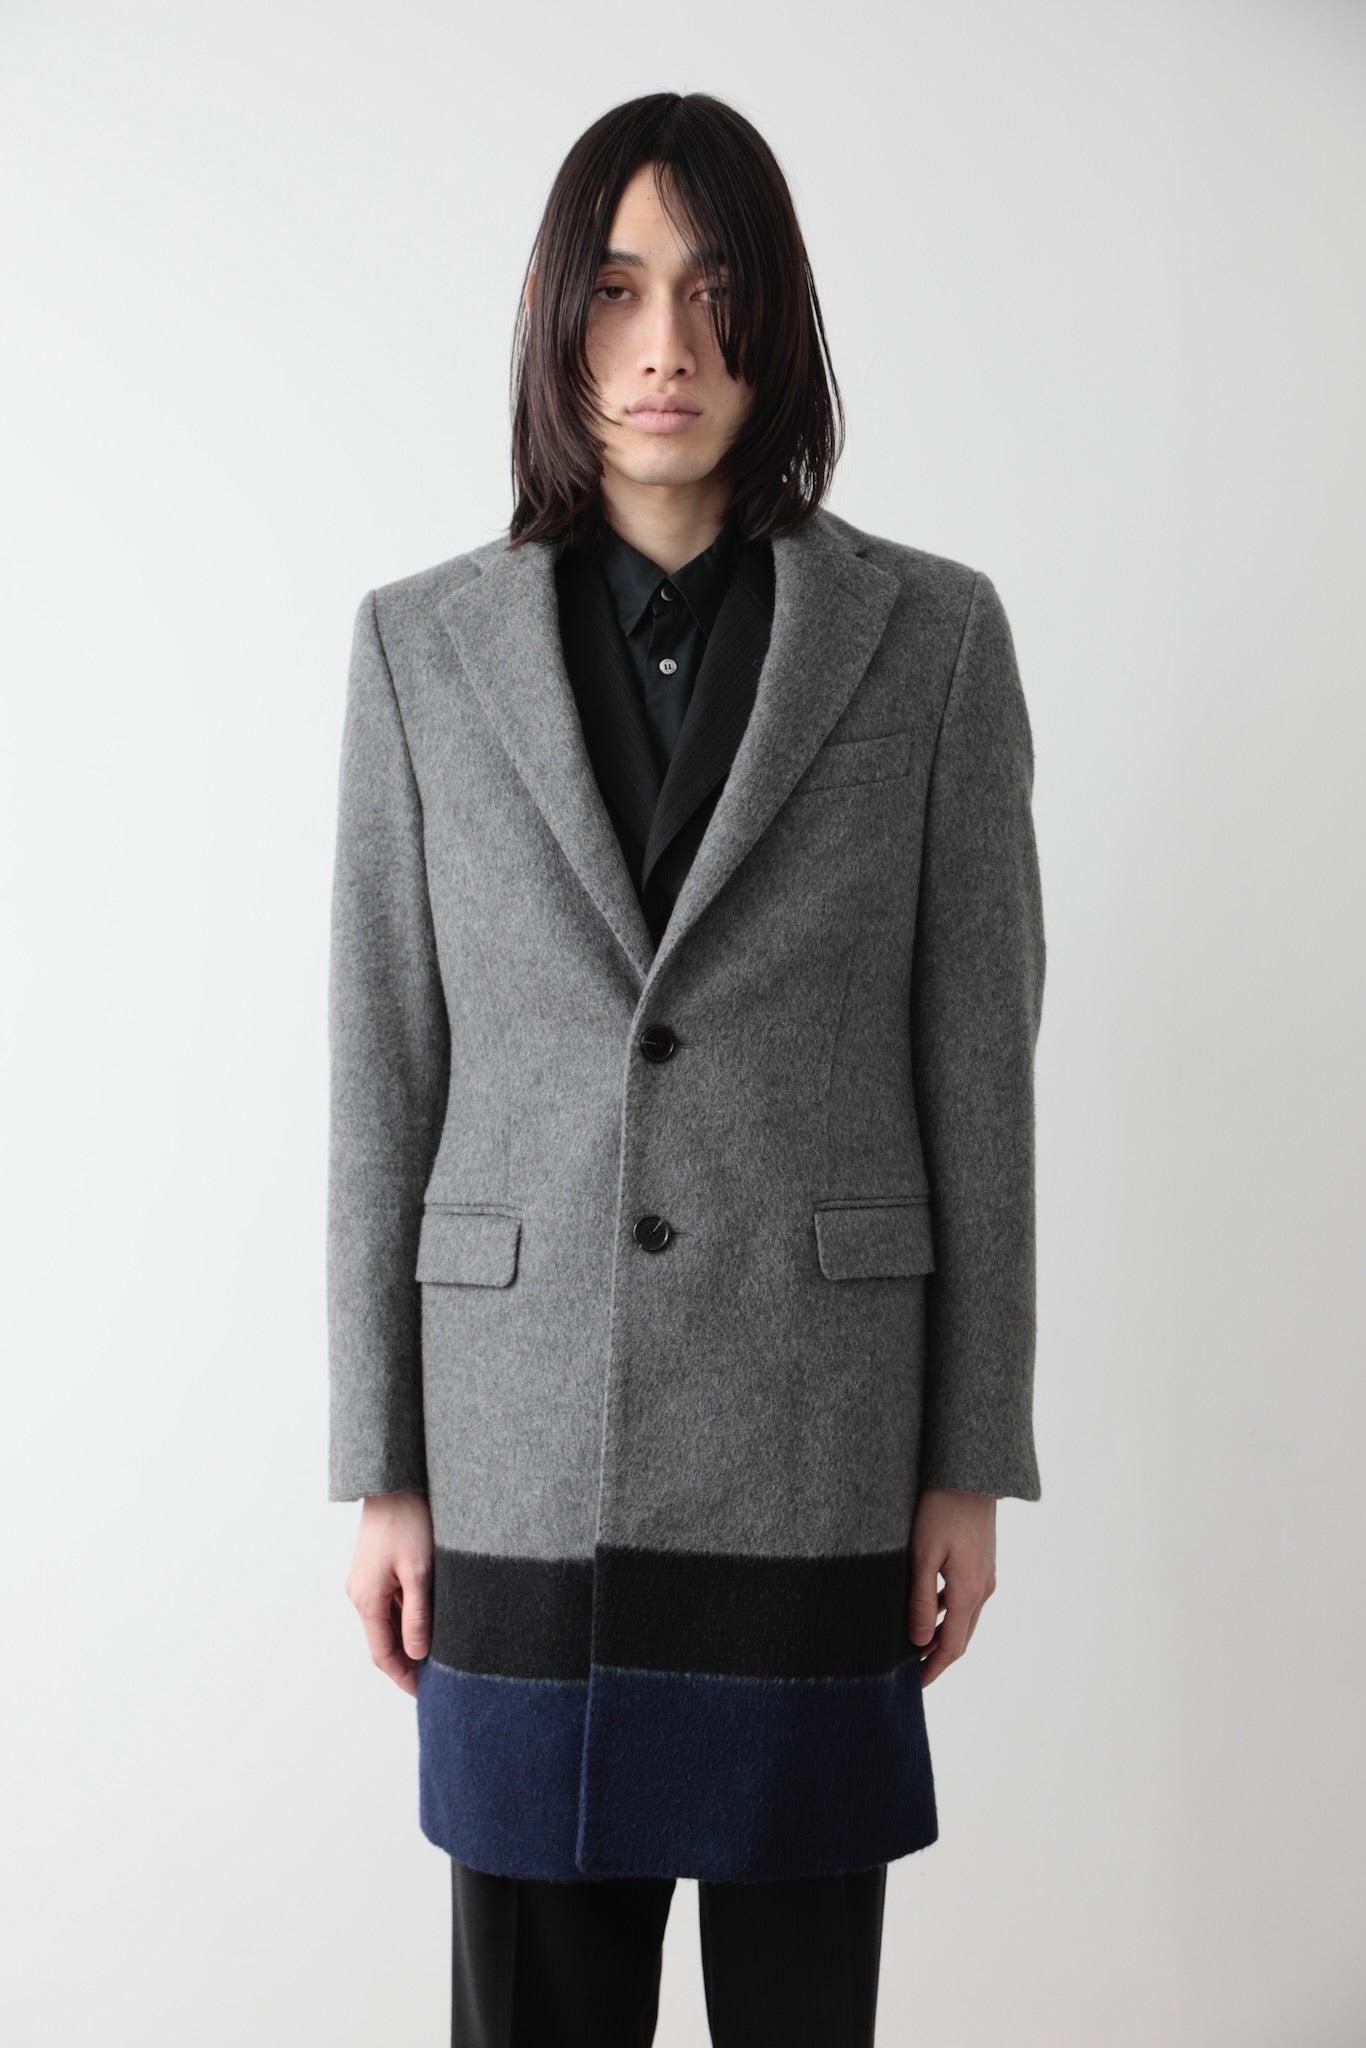 RAF SIMONS TRICO COLOR CHESTER COAT